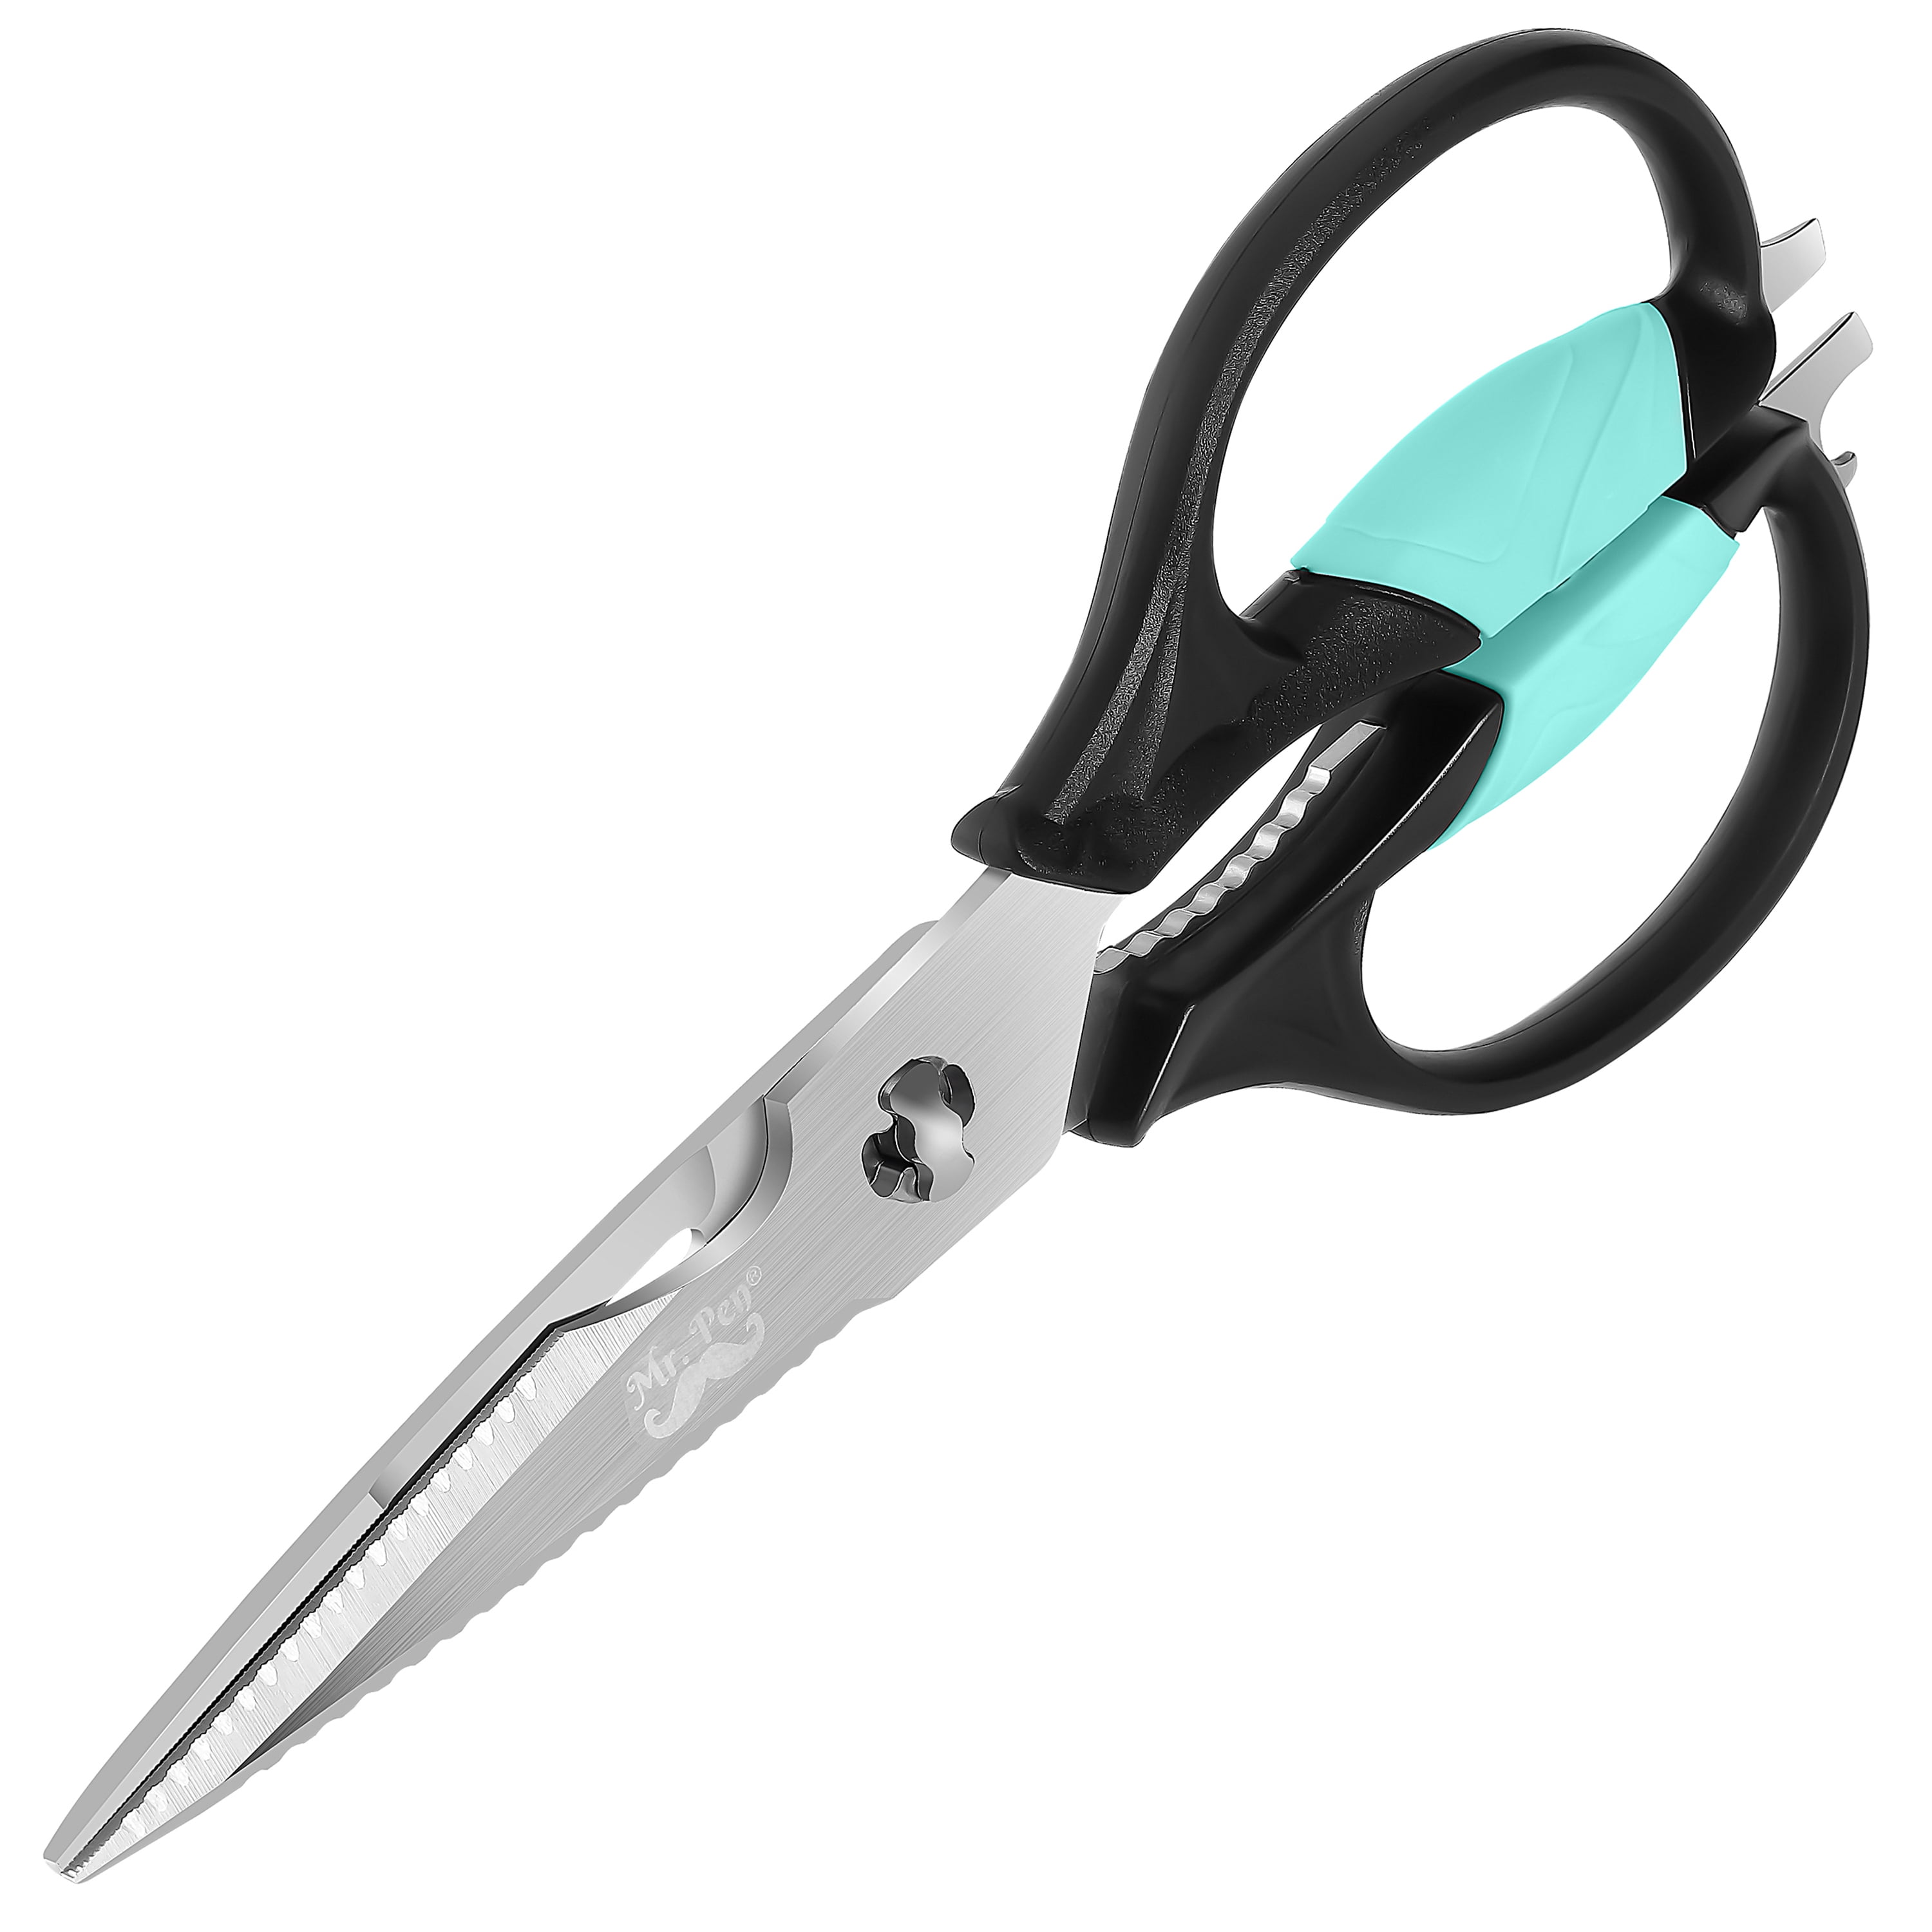 Kitchen Shears Come-Apart - Heavy Duty Culinary Scissors for Cutting  Poultry, Fish, Meat, Food - Large Size (9.25”) - Ultra Sharp Blade - Black  Handle